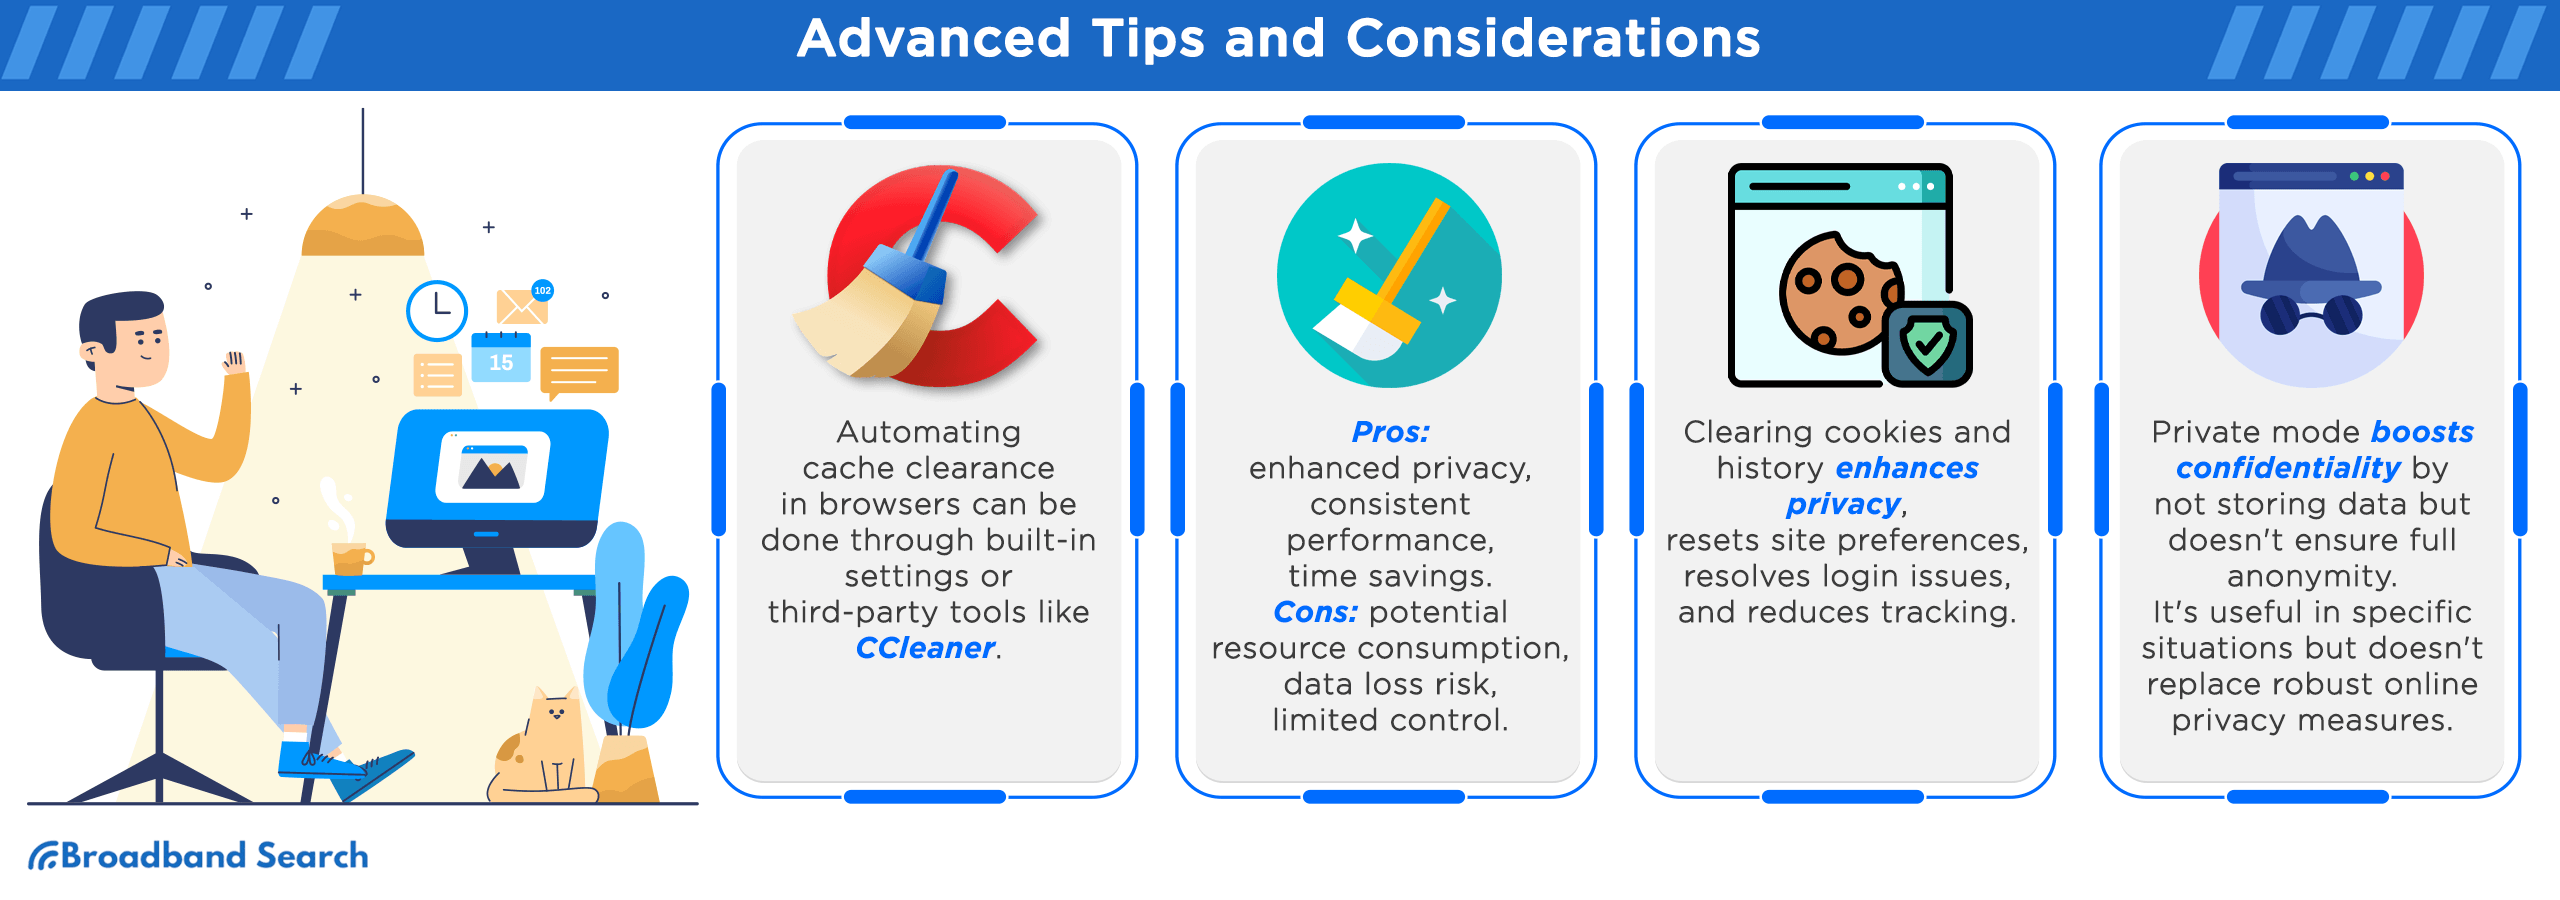 Advanced tips and considerations